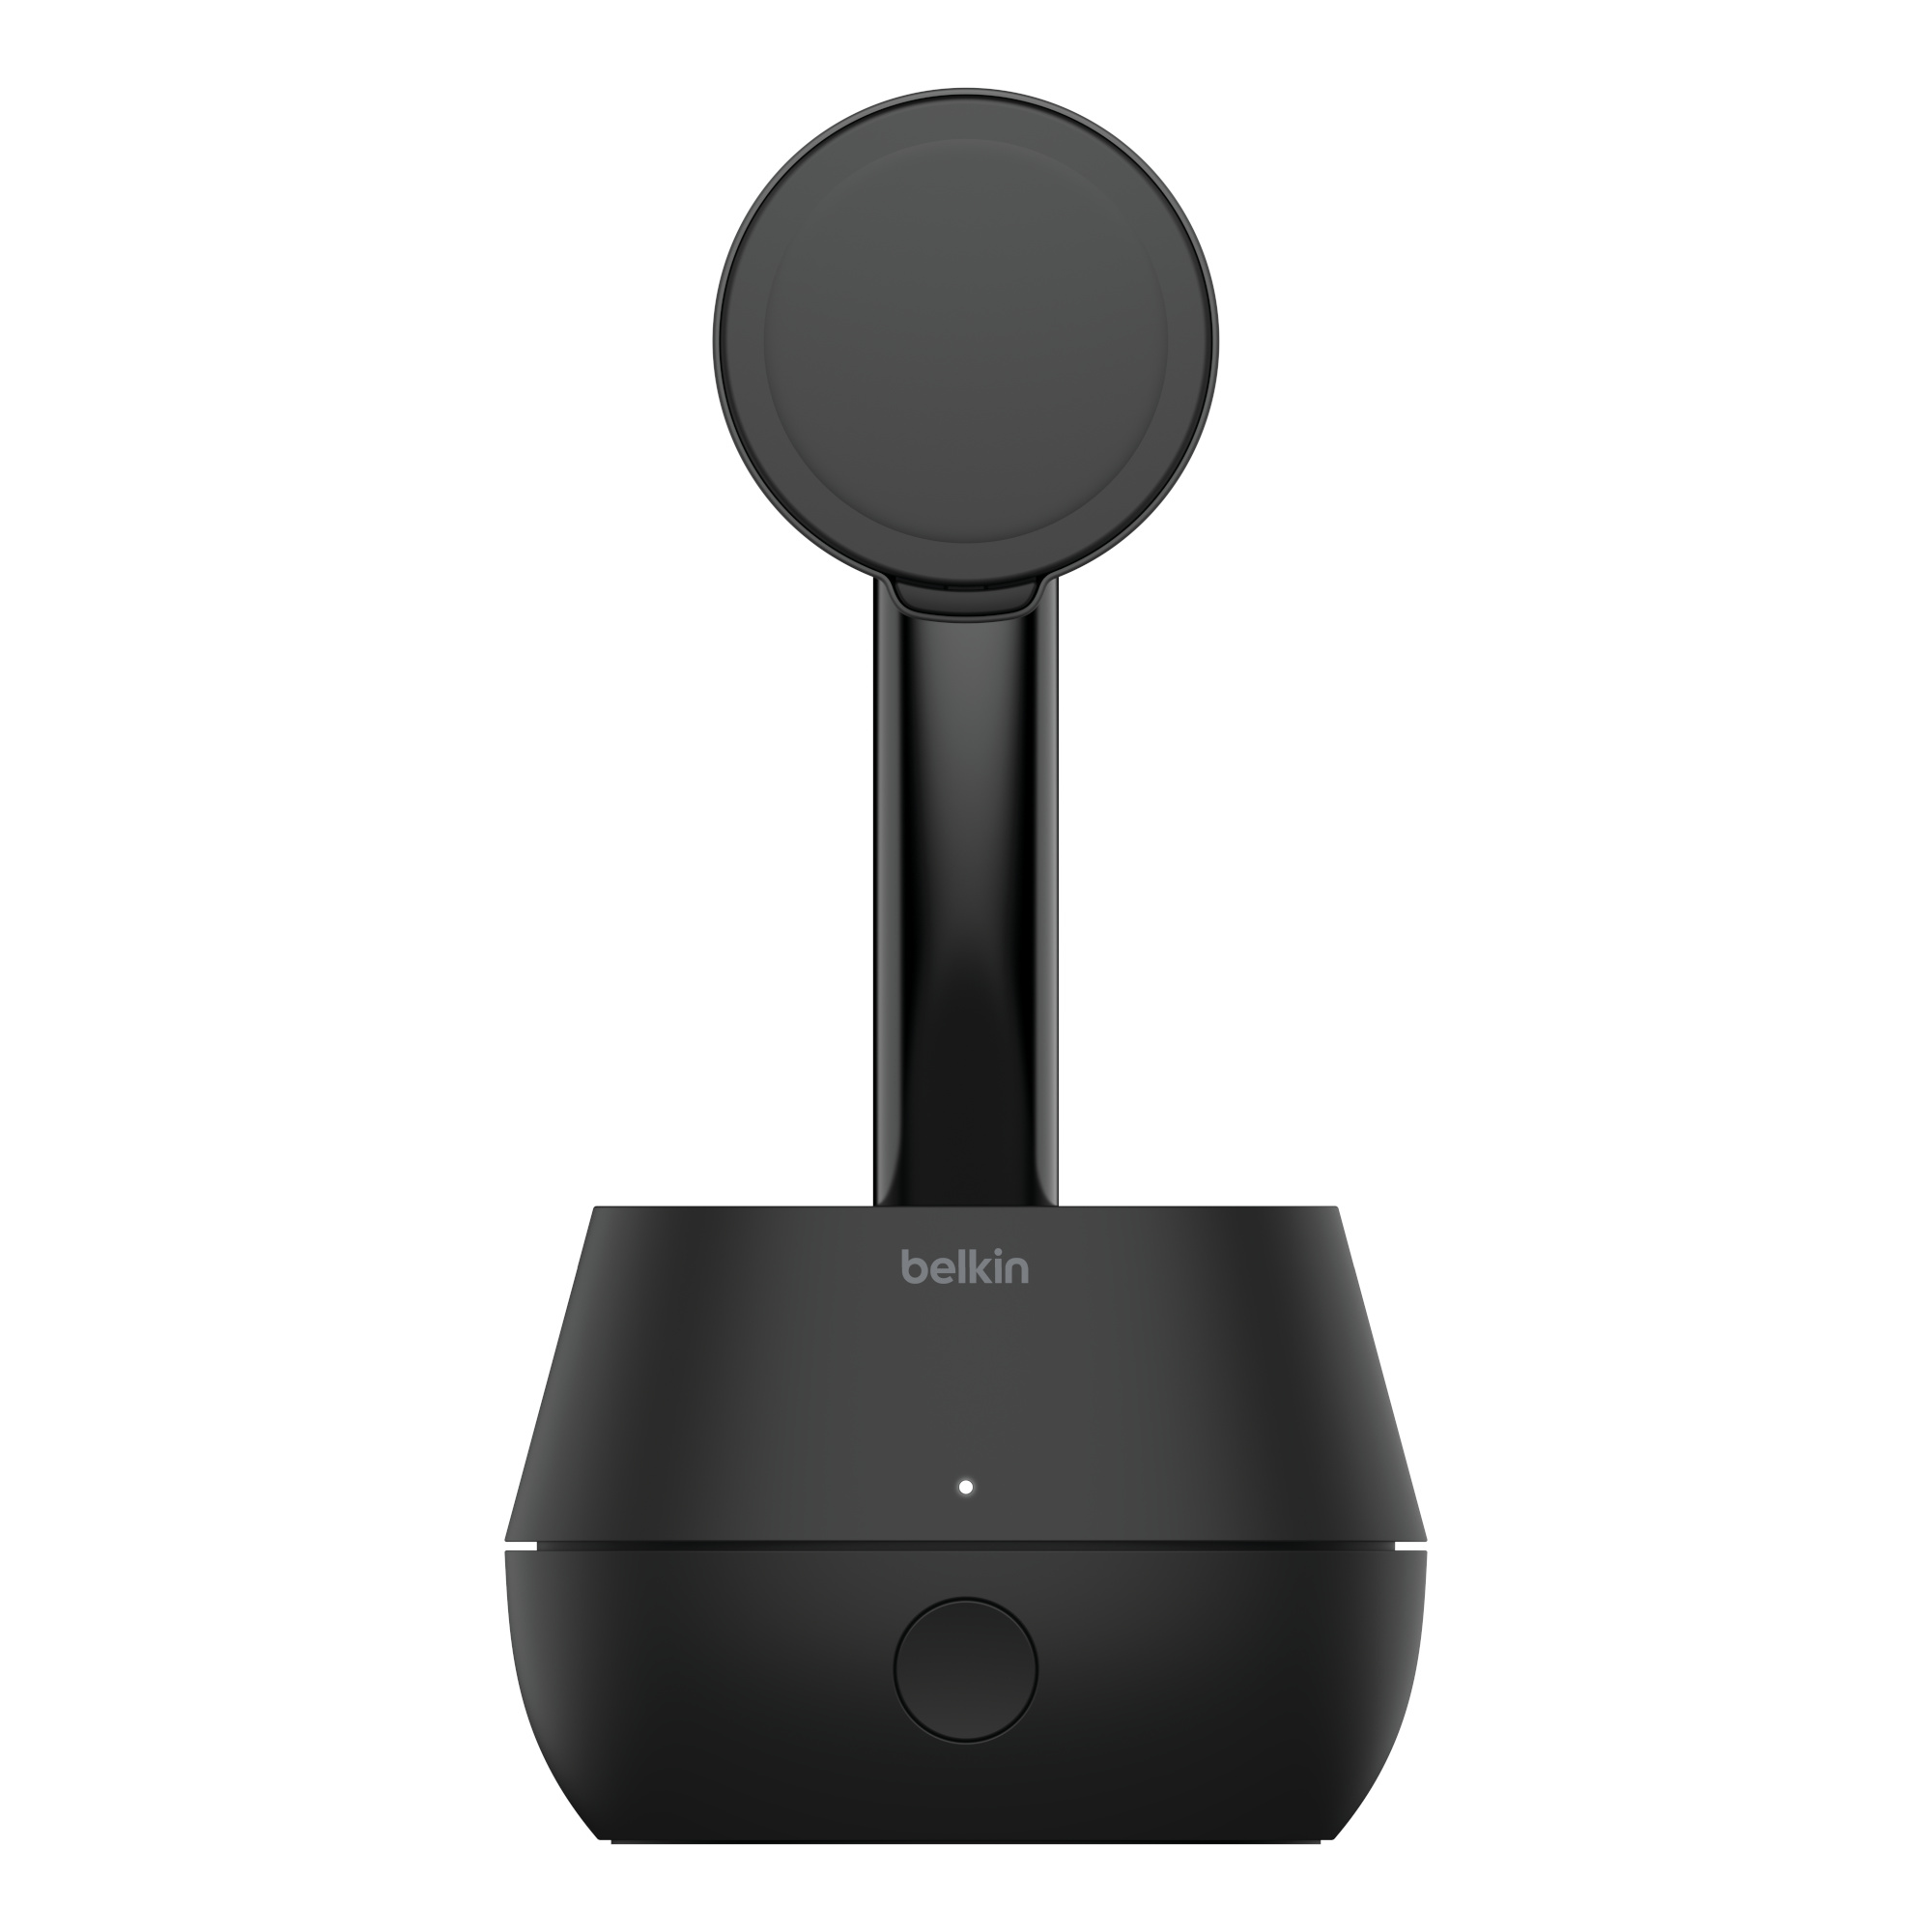 A front view of the Belkin Auto-Tracking Stand Pro.